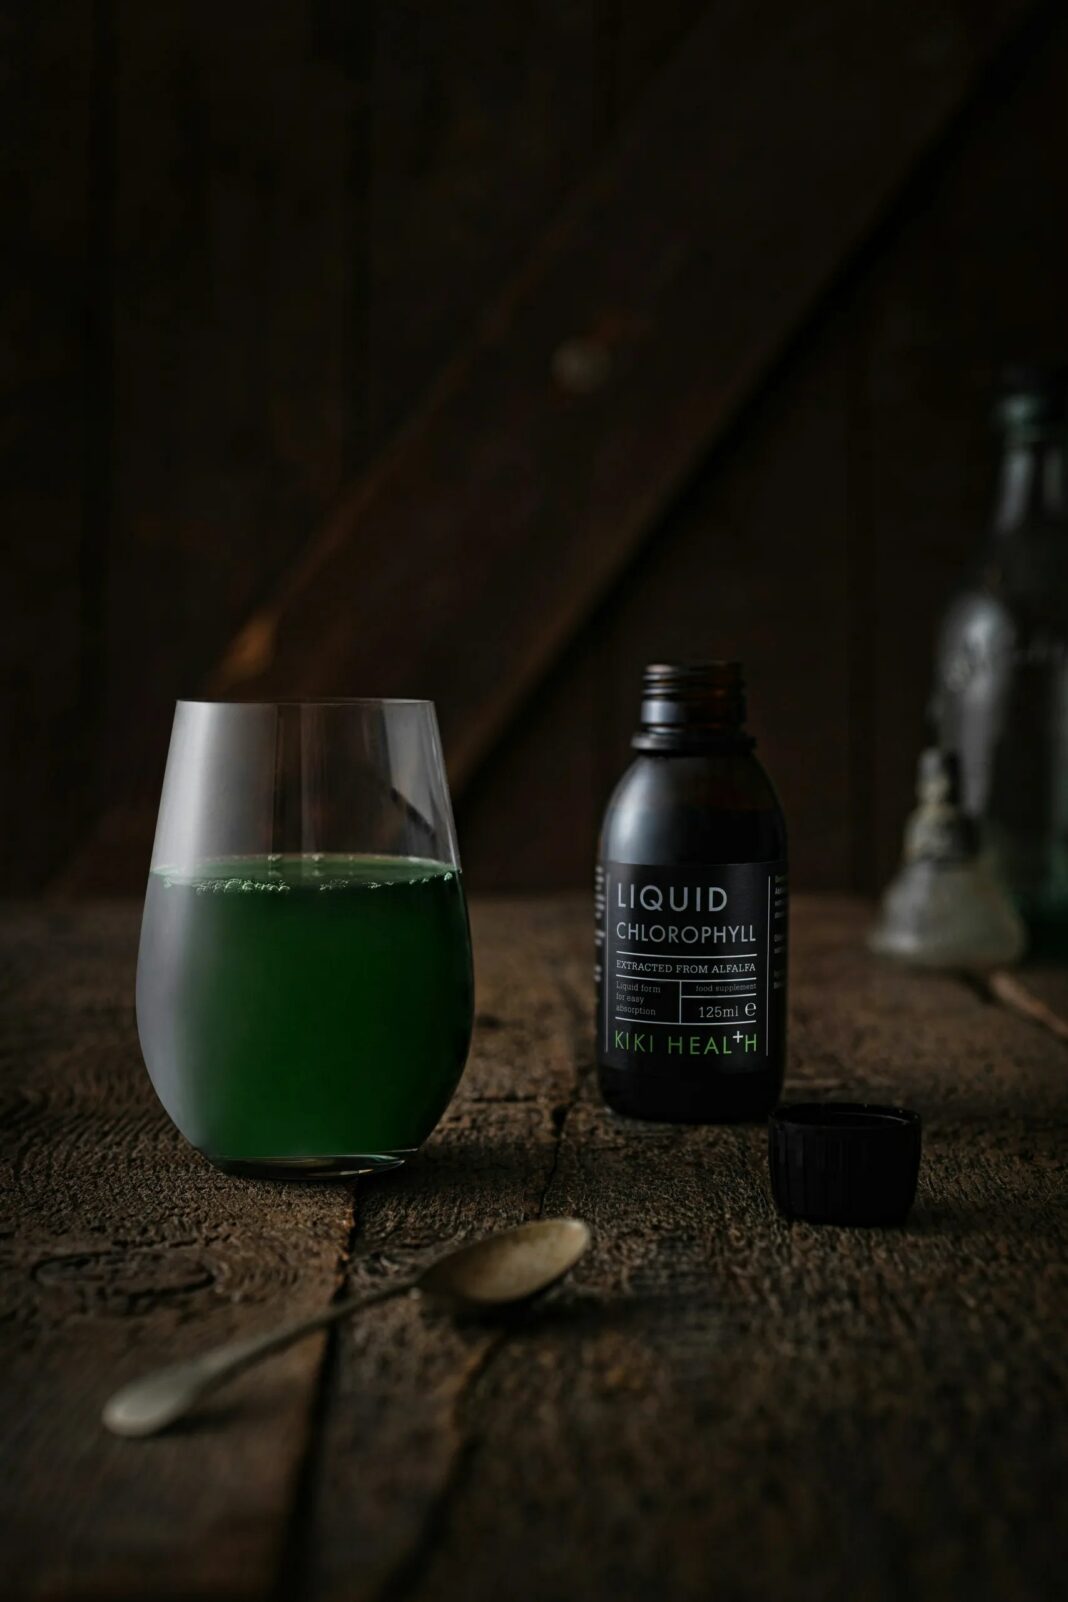 chlorophyll in a glass cup